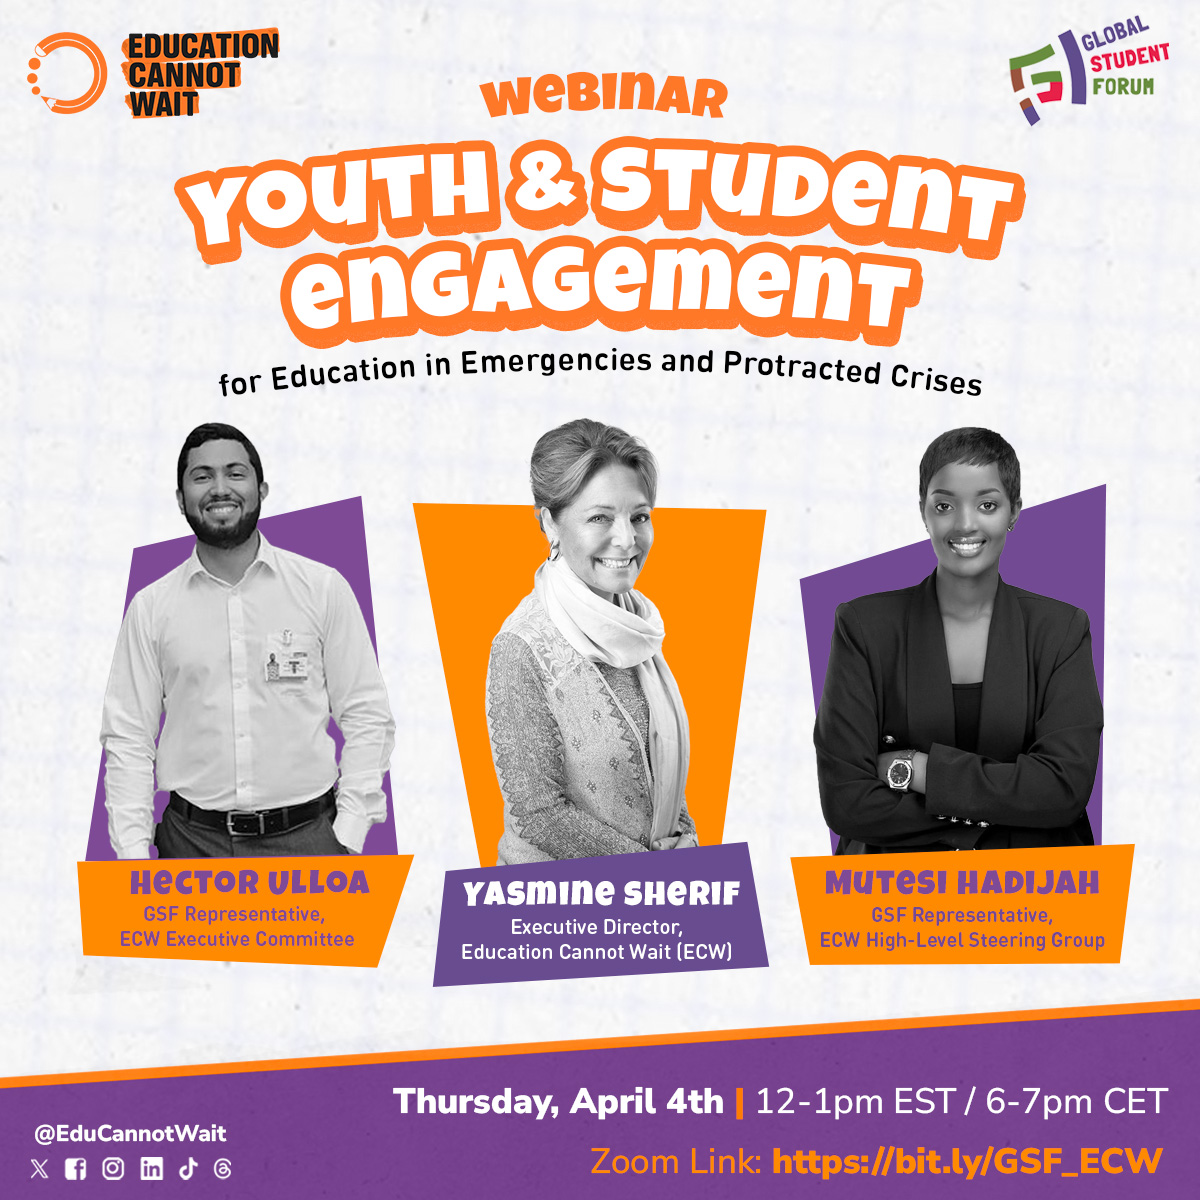 ⚡️Power to the youth! Calling youth across🌎to join #ECW ExDir @YasmineSherif1 & @GlobalStuForum Reps to @EduCannotWait's HLSG & Excom @HectorUlloahn+@MutesiHadijah1 at the 1st Youth+Student Engagement for #EiEPC Webinar! 🗓️4 April ⏰12-1 EST/6-7pm CET ✍️educationcannotwait.org/news-stories/f…